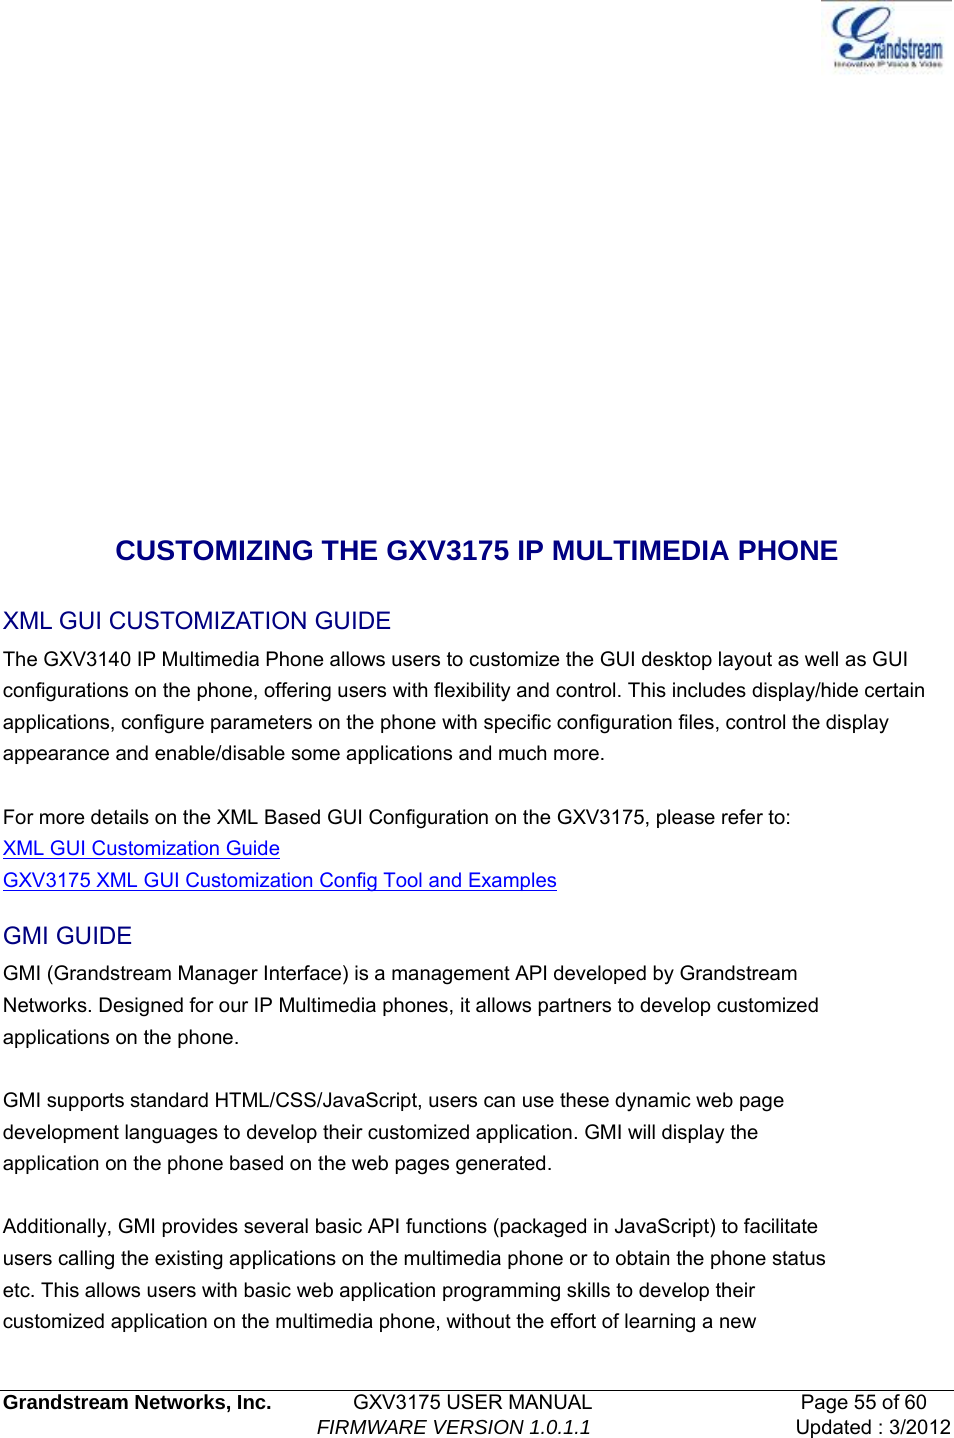   Grandstream Networks, Inc.        GXV3175 USER MANUAL                     Page 55 of 60                                FIRMWARE VERSION 1.0.1.1 Updated : 3/2012         CUSTOMIZING THE GXV3175 IP MULTIMEDIA PHONE XML GUI CUSTOMIZATION GUIDE The GXV3140 IP Multimedia Phone allows users to customize the GUI desktop layout as well as GUI configurations on the phone, offering users with flexibility and control. This includes display/hide certain applications, configure parameters on the phone with specific configuration files, control the display appearance and enable/disable some applications and much more.  For more details on the XML Based GUI Configuration on the GXV3175, please refer to: XML GUI Customization Guide GXV3175 XML GUI Customization Config Tool and Examples GMI GUIDE GMI (Grandstream Manager Interface) is a management API developed by Grandstream Networks. Designed for our IP Multimedia phones, it allows partners to develop customized applications on the phone.  GMI supports standard HTML/CSS/JavaScript, users can use these dynamic web page development languages to develop their customized application. GMI will display the application on the phone based on the web pages generated.  Additionally, GMI provides several basic API functions (packaged in JavaScript) to facilitate users calling the existing applications on the multimedia phone or to obtain the phone status etc. This allows users with basic web application programming skills to develop their customized application on the multimedia phone, without the effort of learning a new 